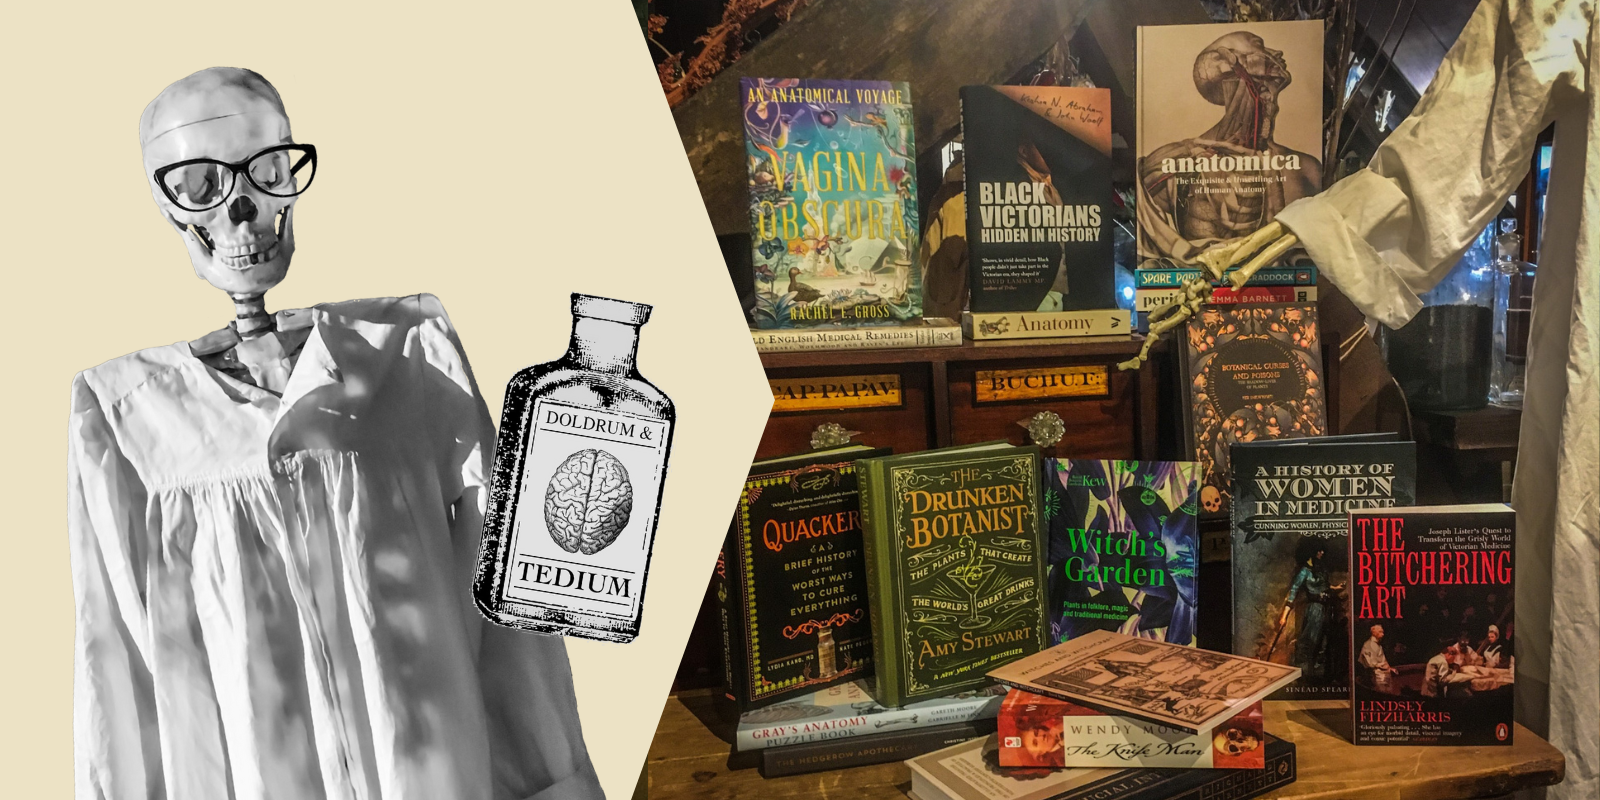 Left: a cut-out skeleton wearing glasses and a gown next to an illustrated bottle labelled Doldrum & Tedium. Right: a colour photo of a selection of books displayed upright and in piles, with a skeleton's hand resting on a book on the right